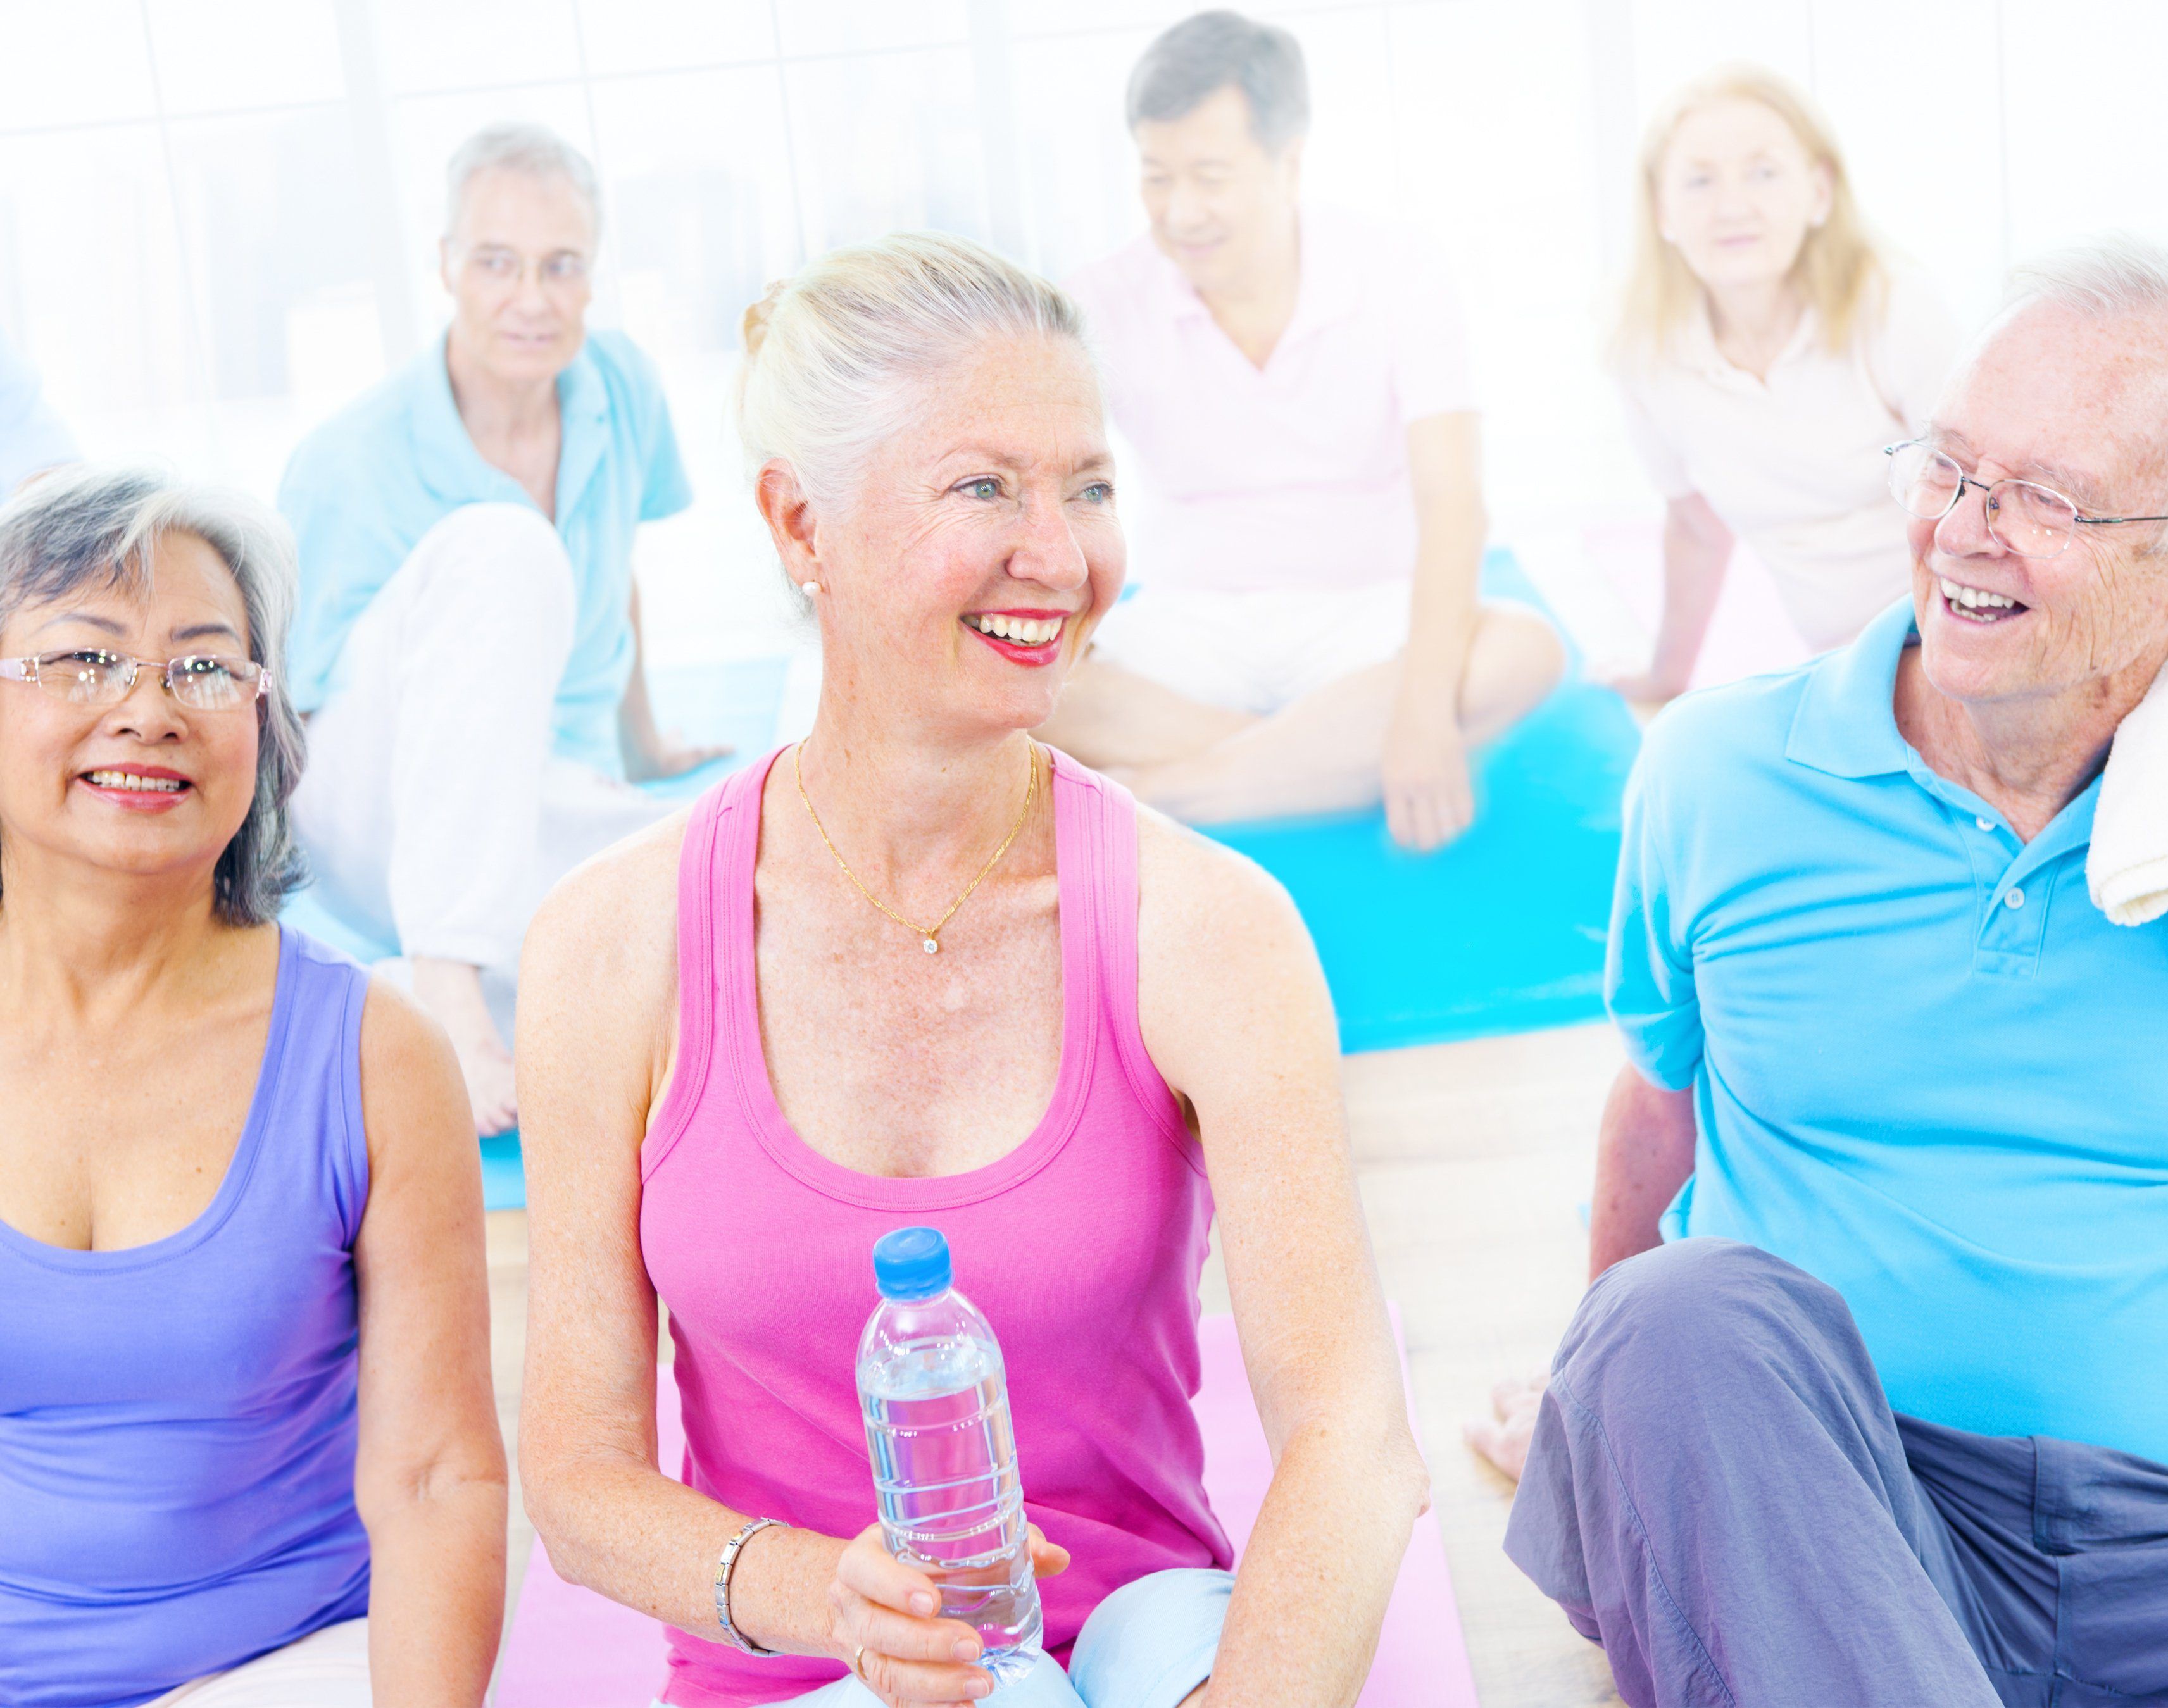 Club 50 fitness and wellness for mature adults